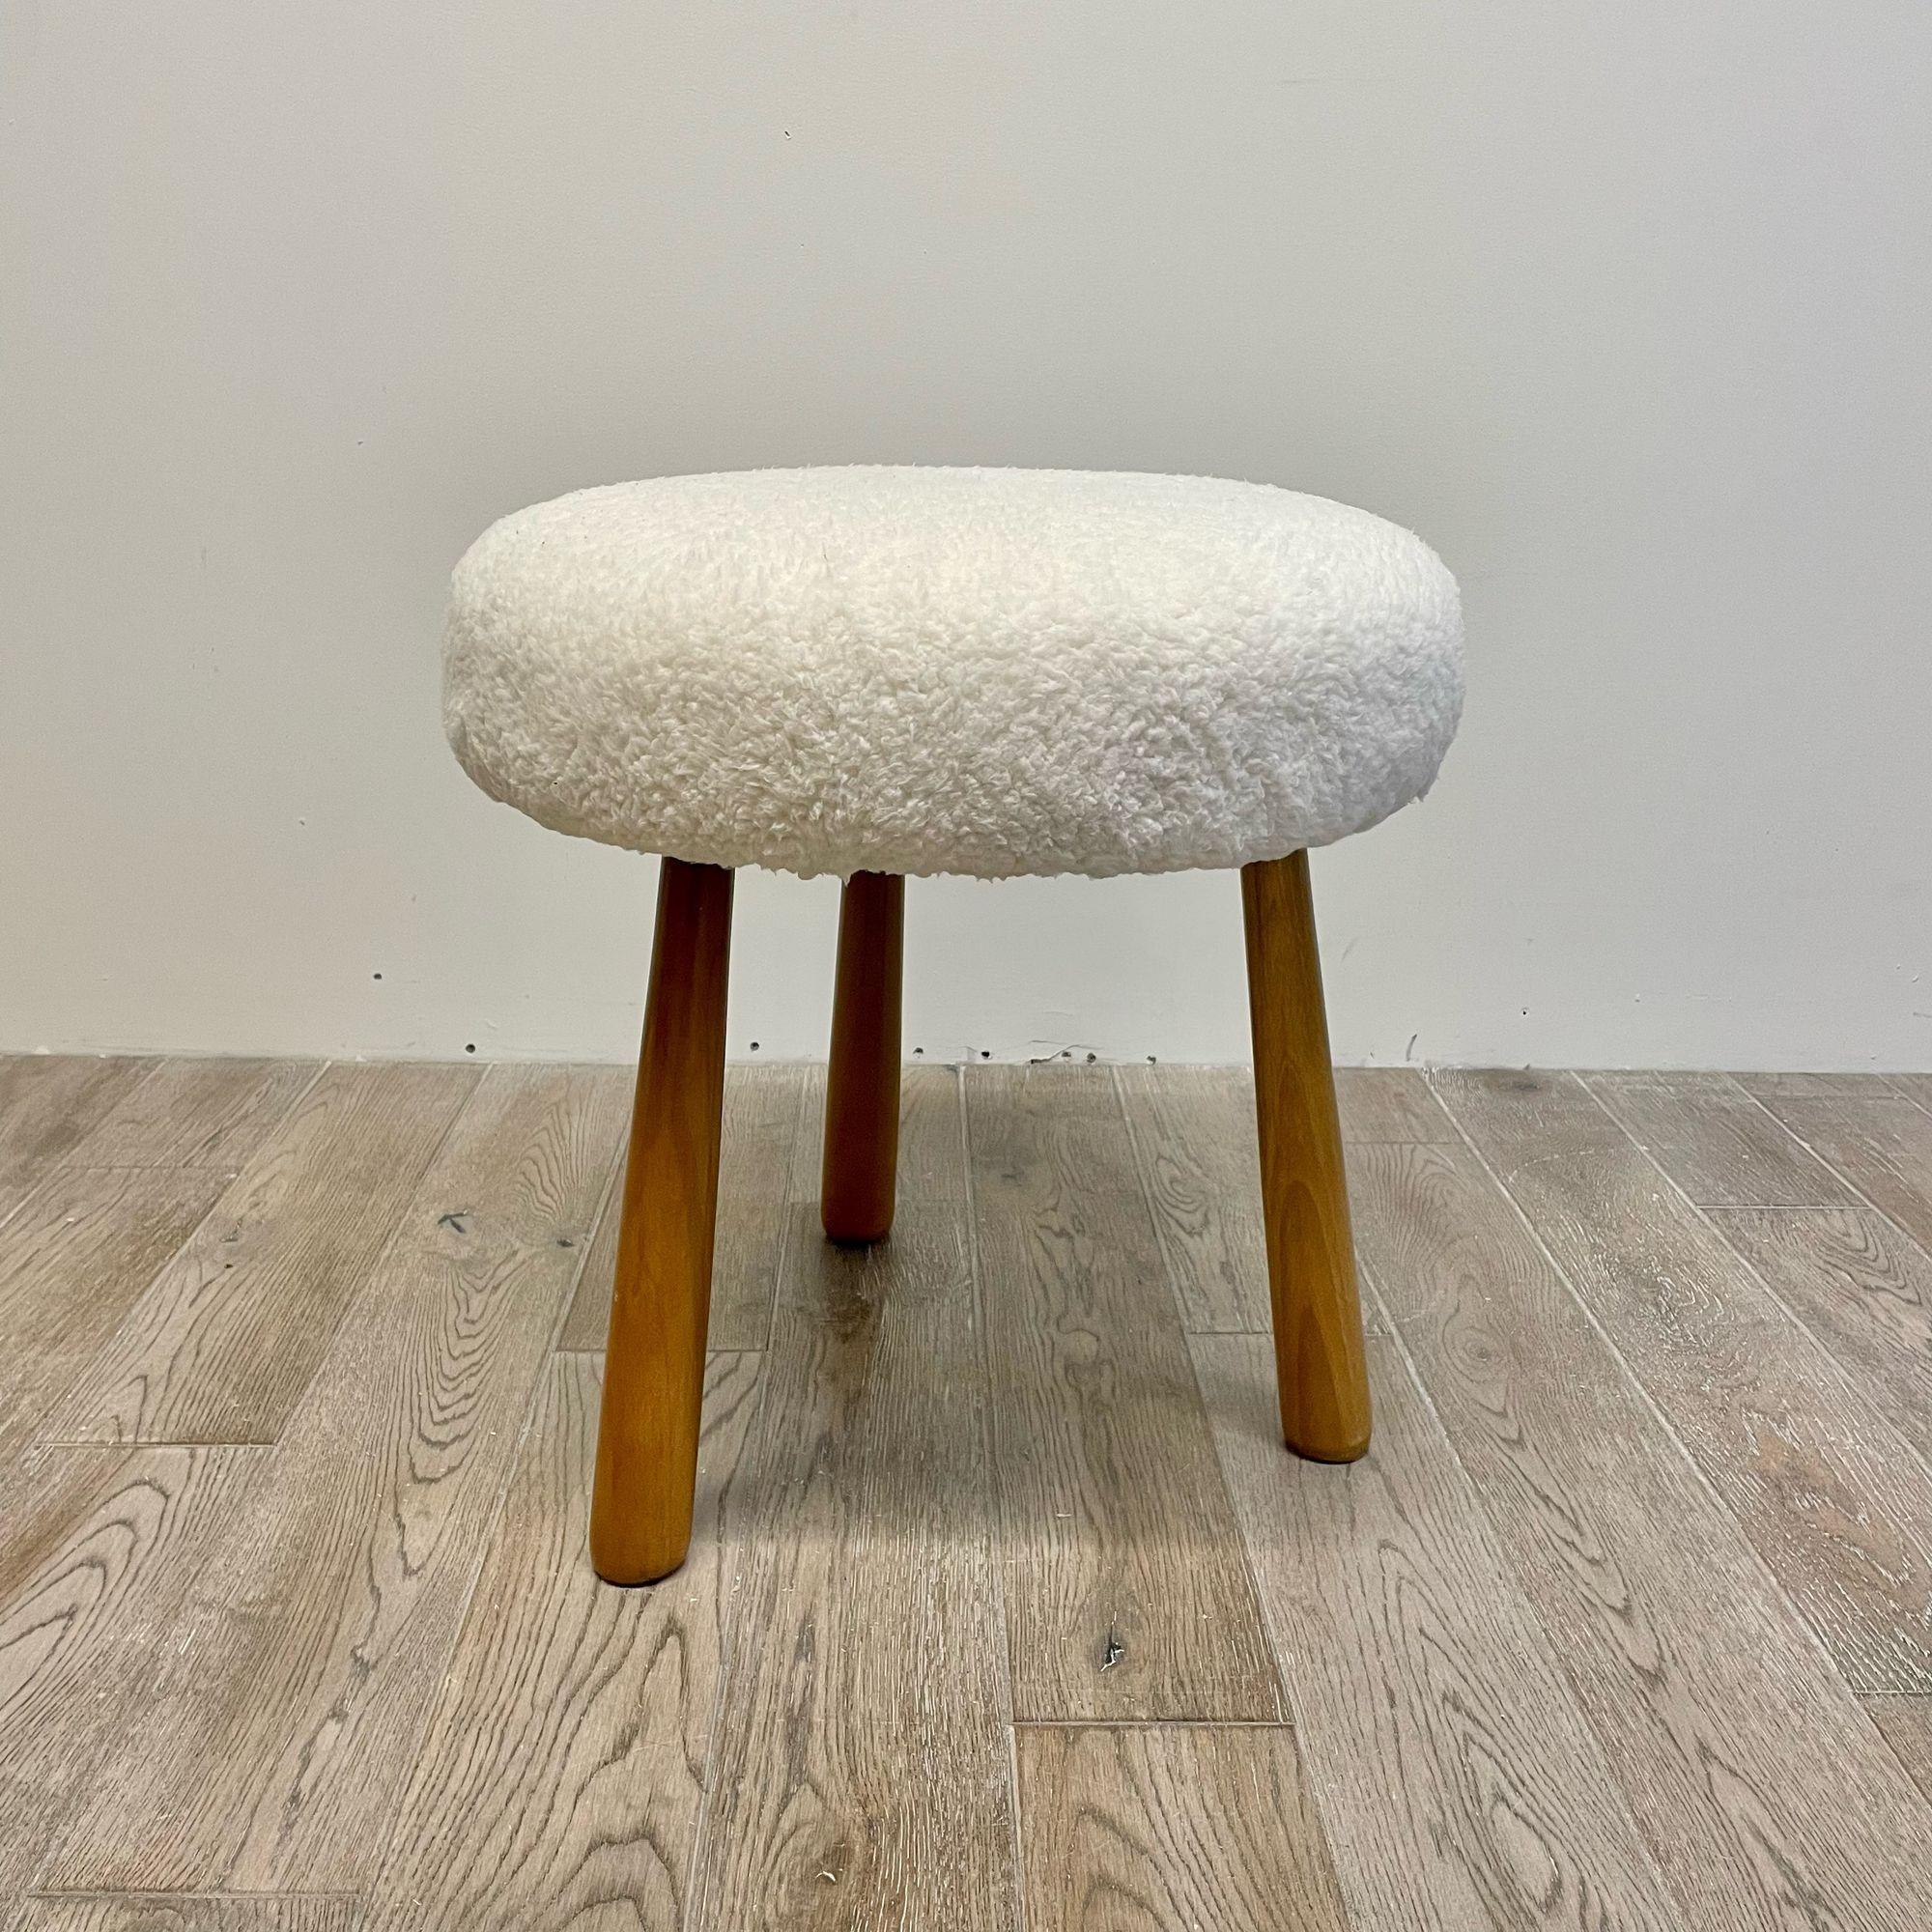 Contemporary Swedish Modern Style Faux Sheepskin Footstool / Ottoman, Cream
Contemporary organic form tri-pod stool or ottoman. New comfortable foam cushioning and white faux shearling. Overall form and design inspired by Nordic design / Swedish